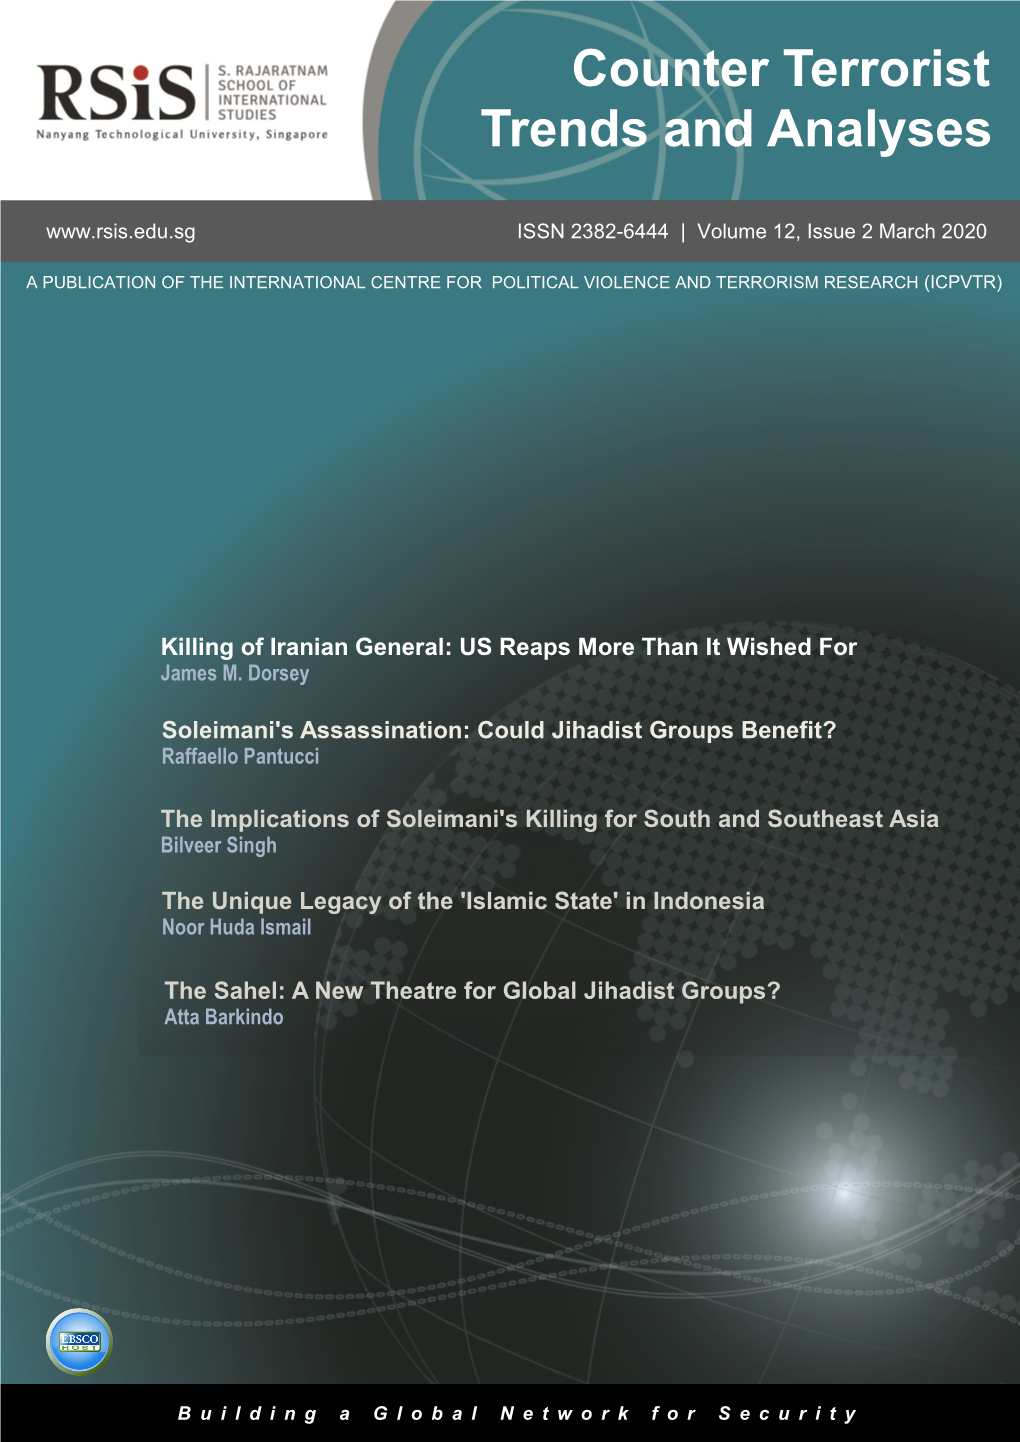 Counter Terrorist Trends and Analyses (CTTA) March 2020 Issue